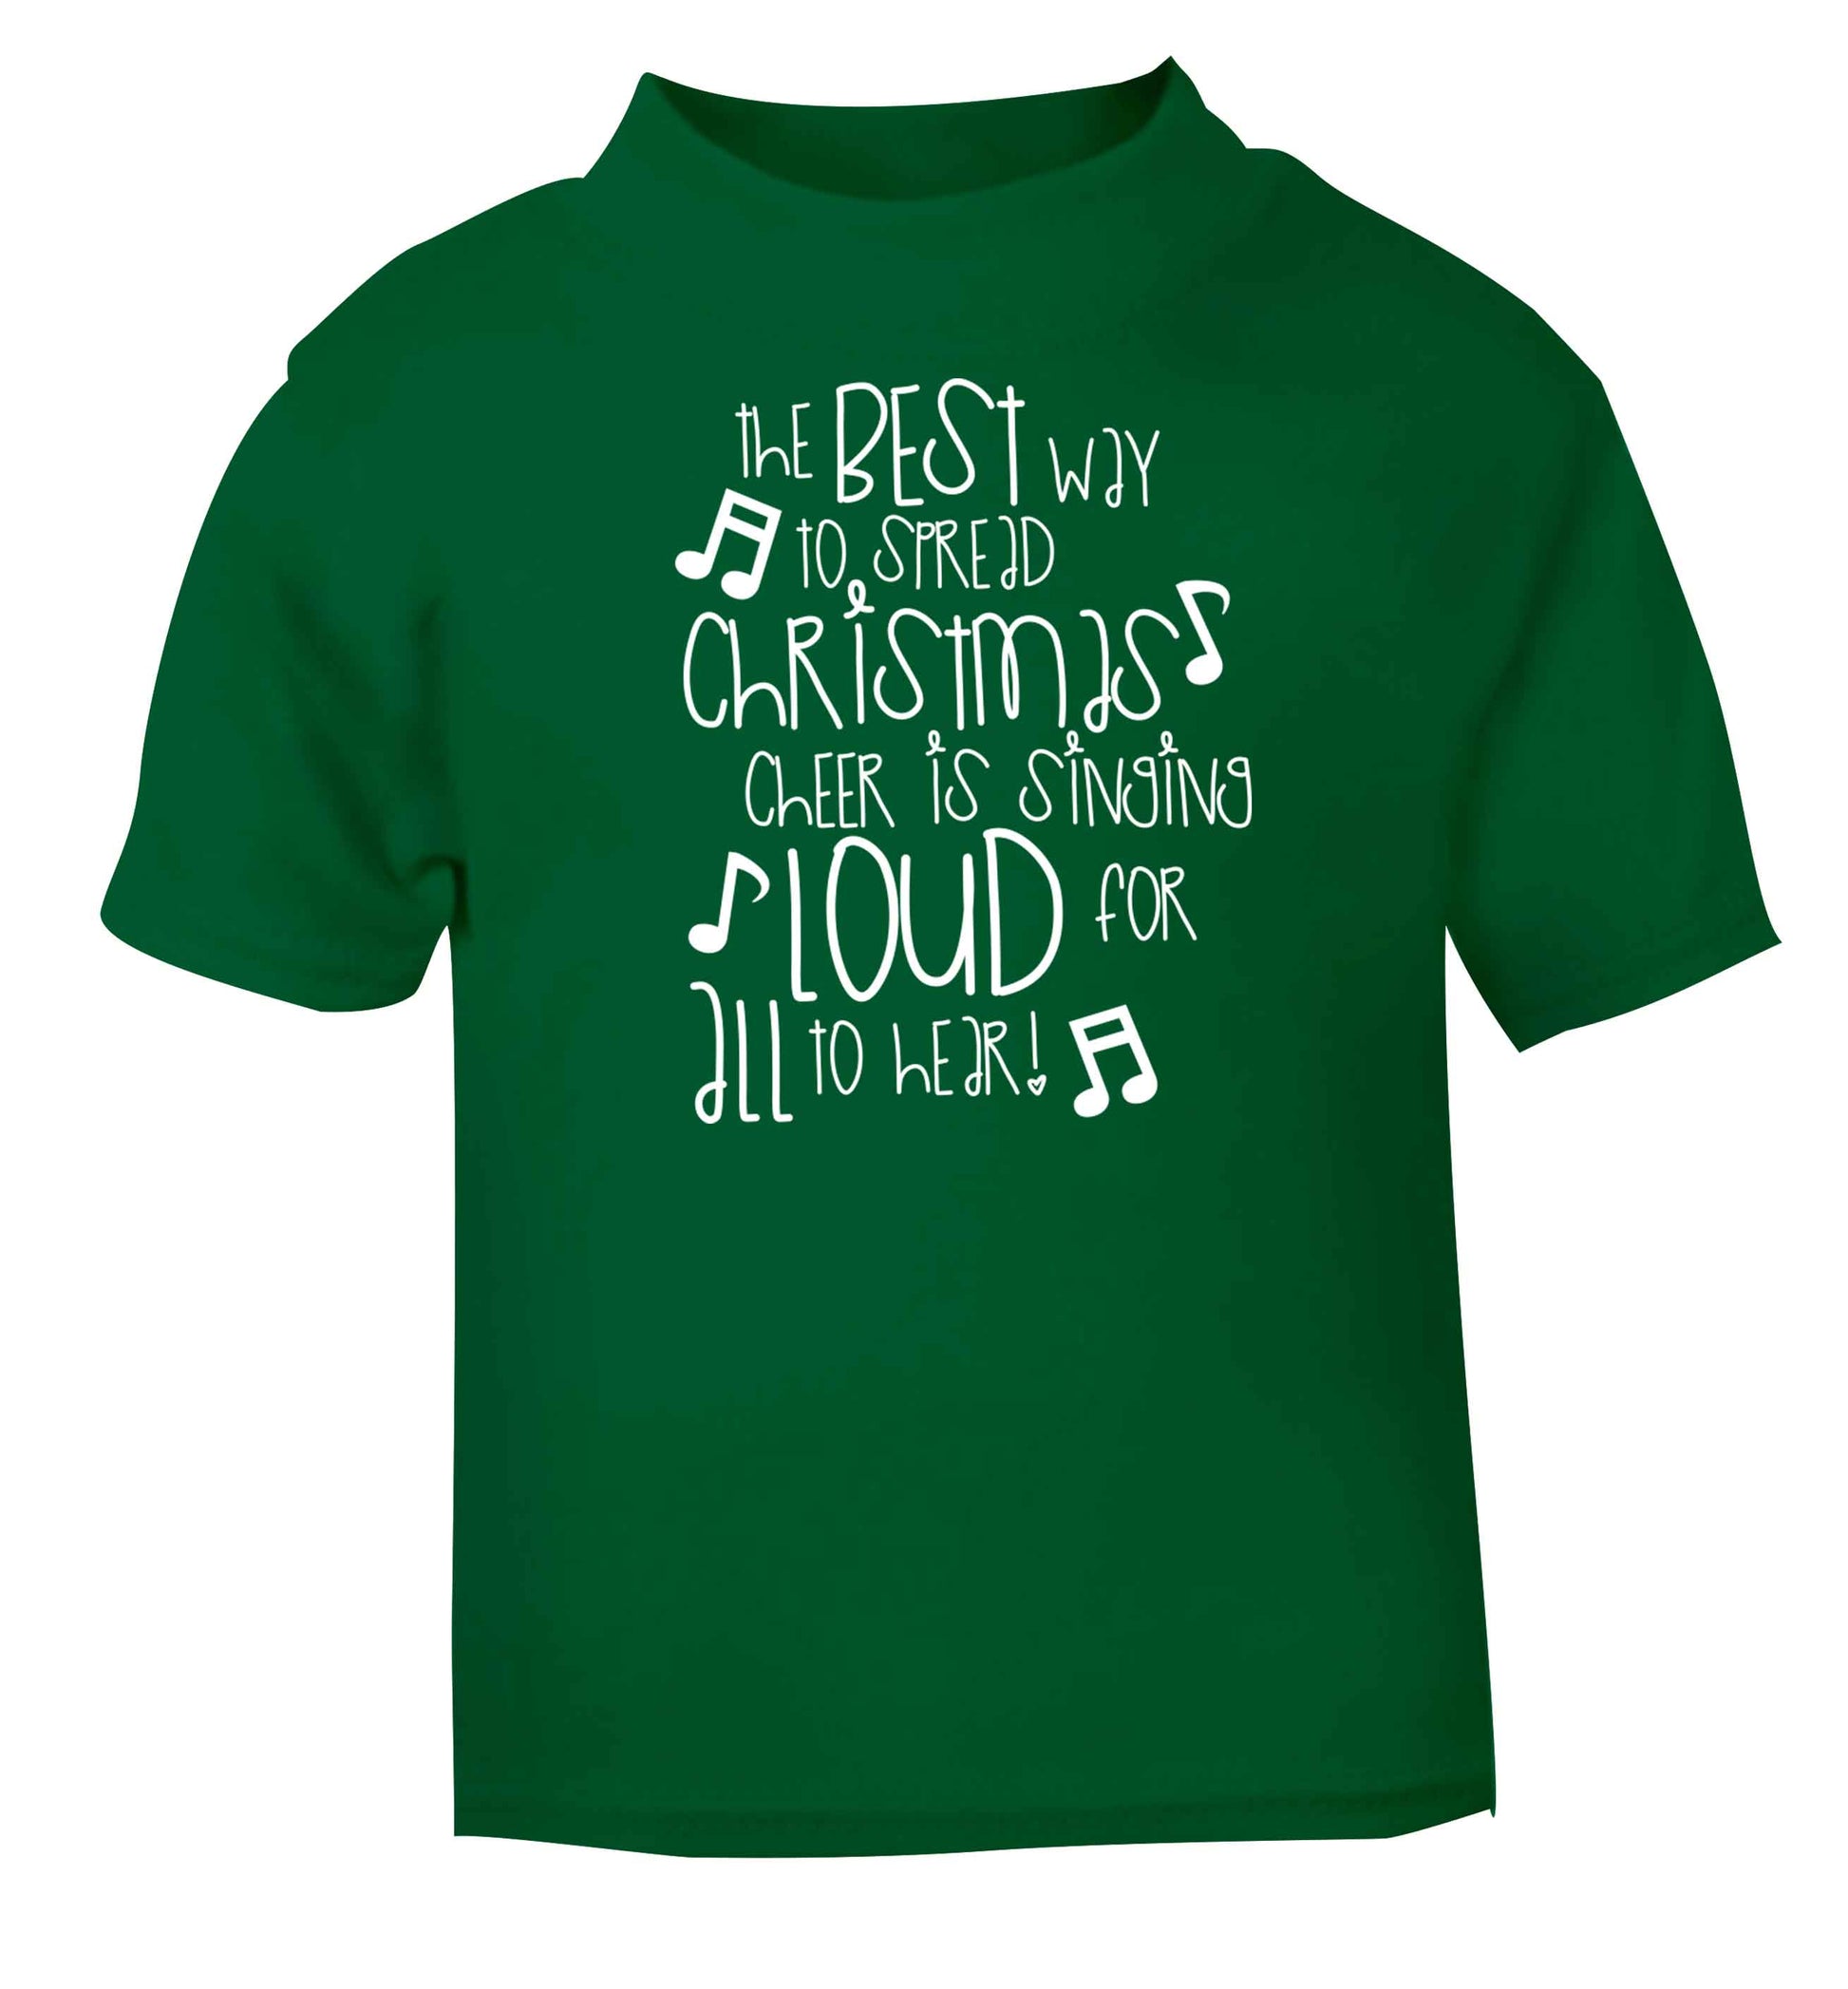 The best way to spread Christmas cheer is singing loud for all to hear green baby toddler Tshirt 2 Years